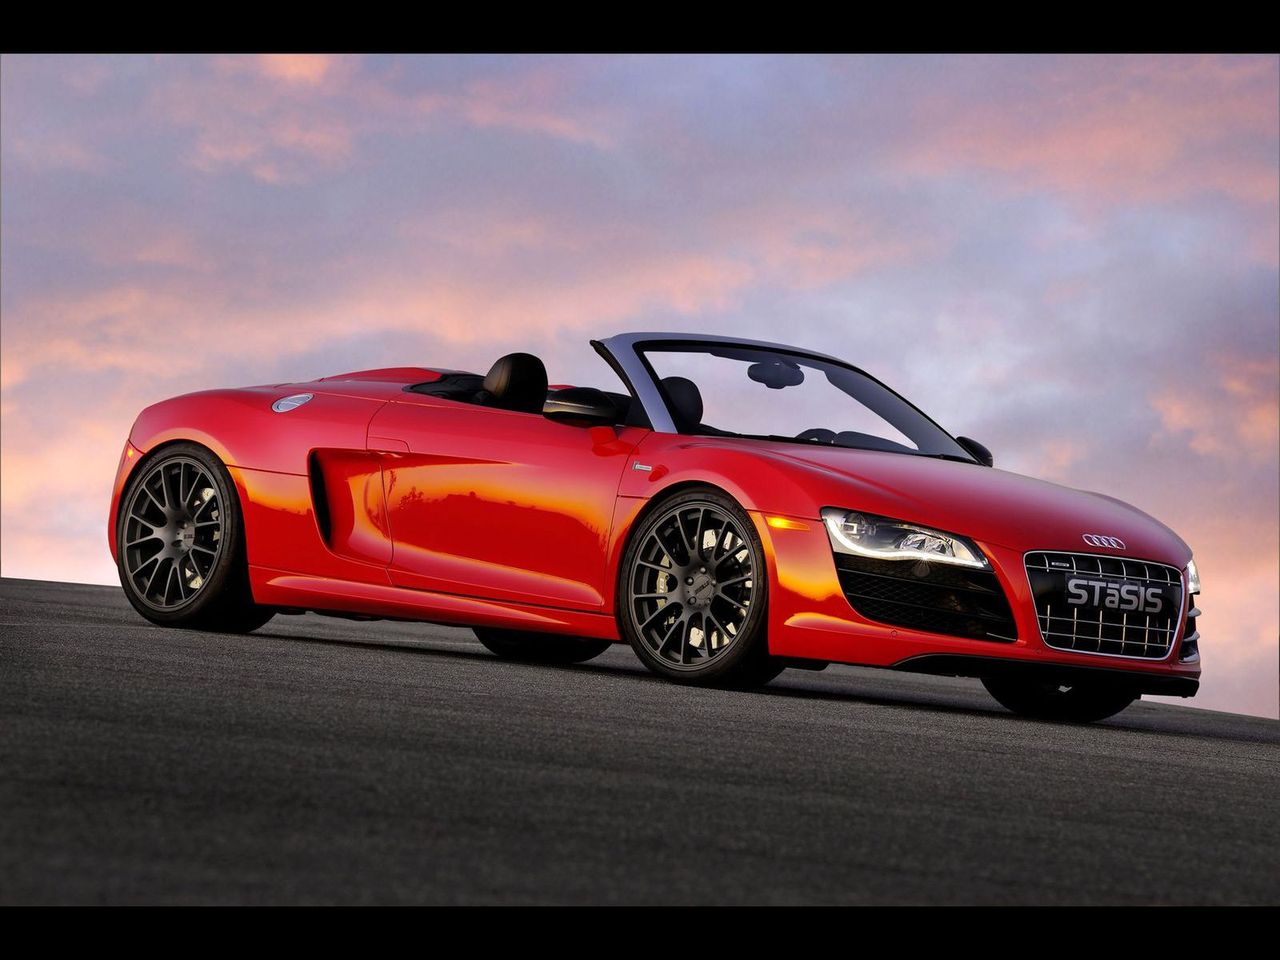 STaSIS R8 Spyder Supercharged Challenge Extreme Edition fot.1 STaSIS R8 Spyder Supercharged Challenge Extreme Edition [720 KM]